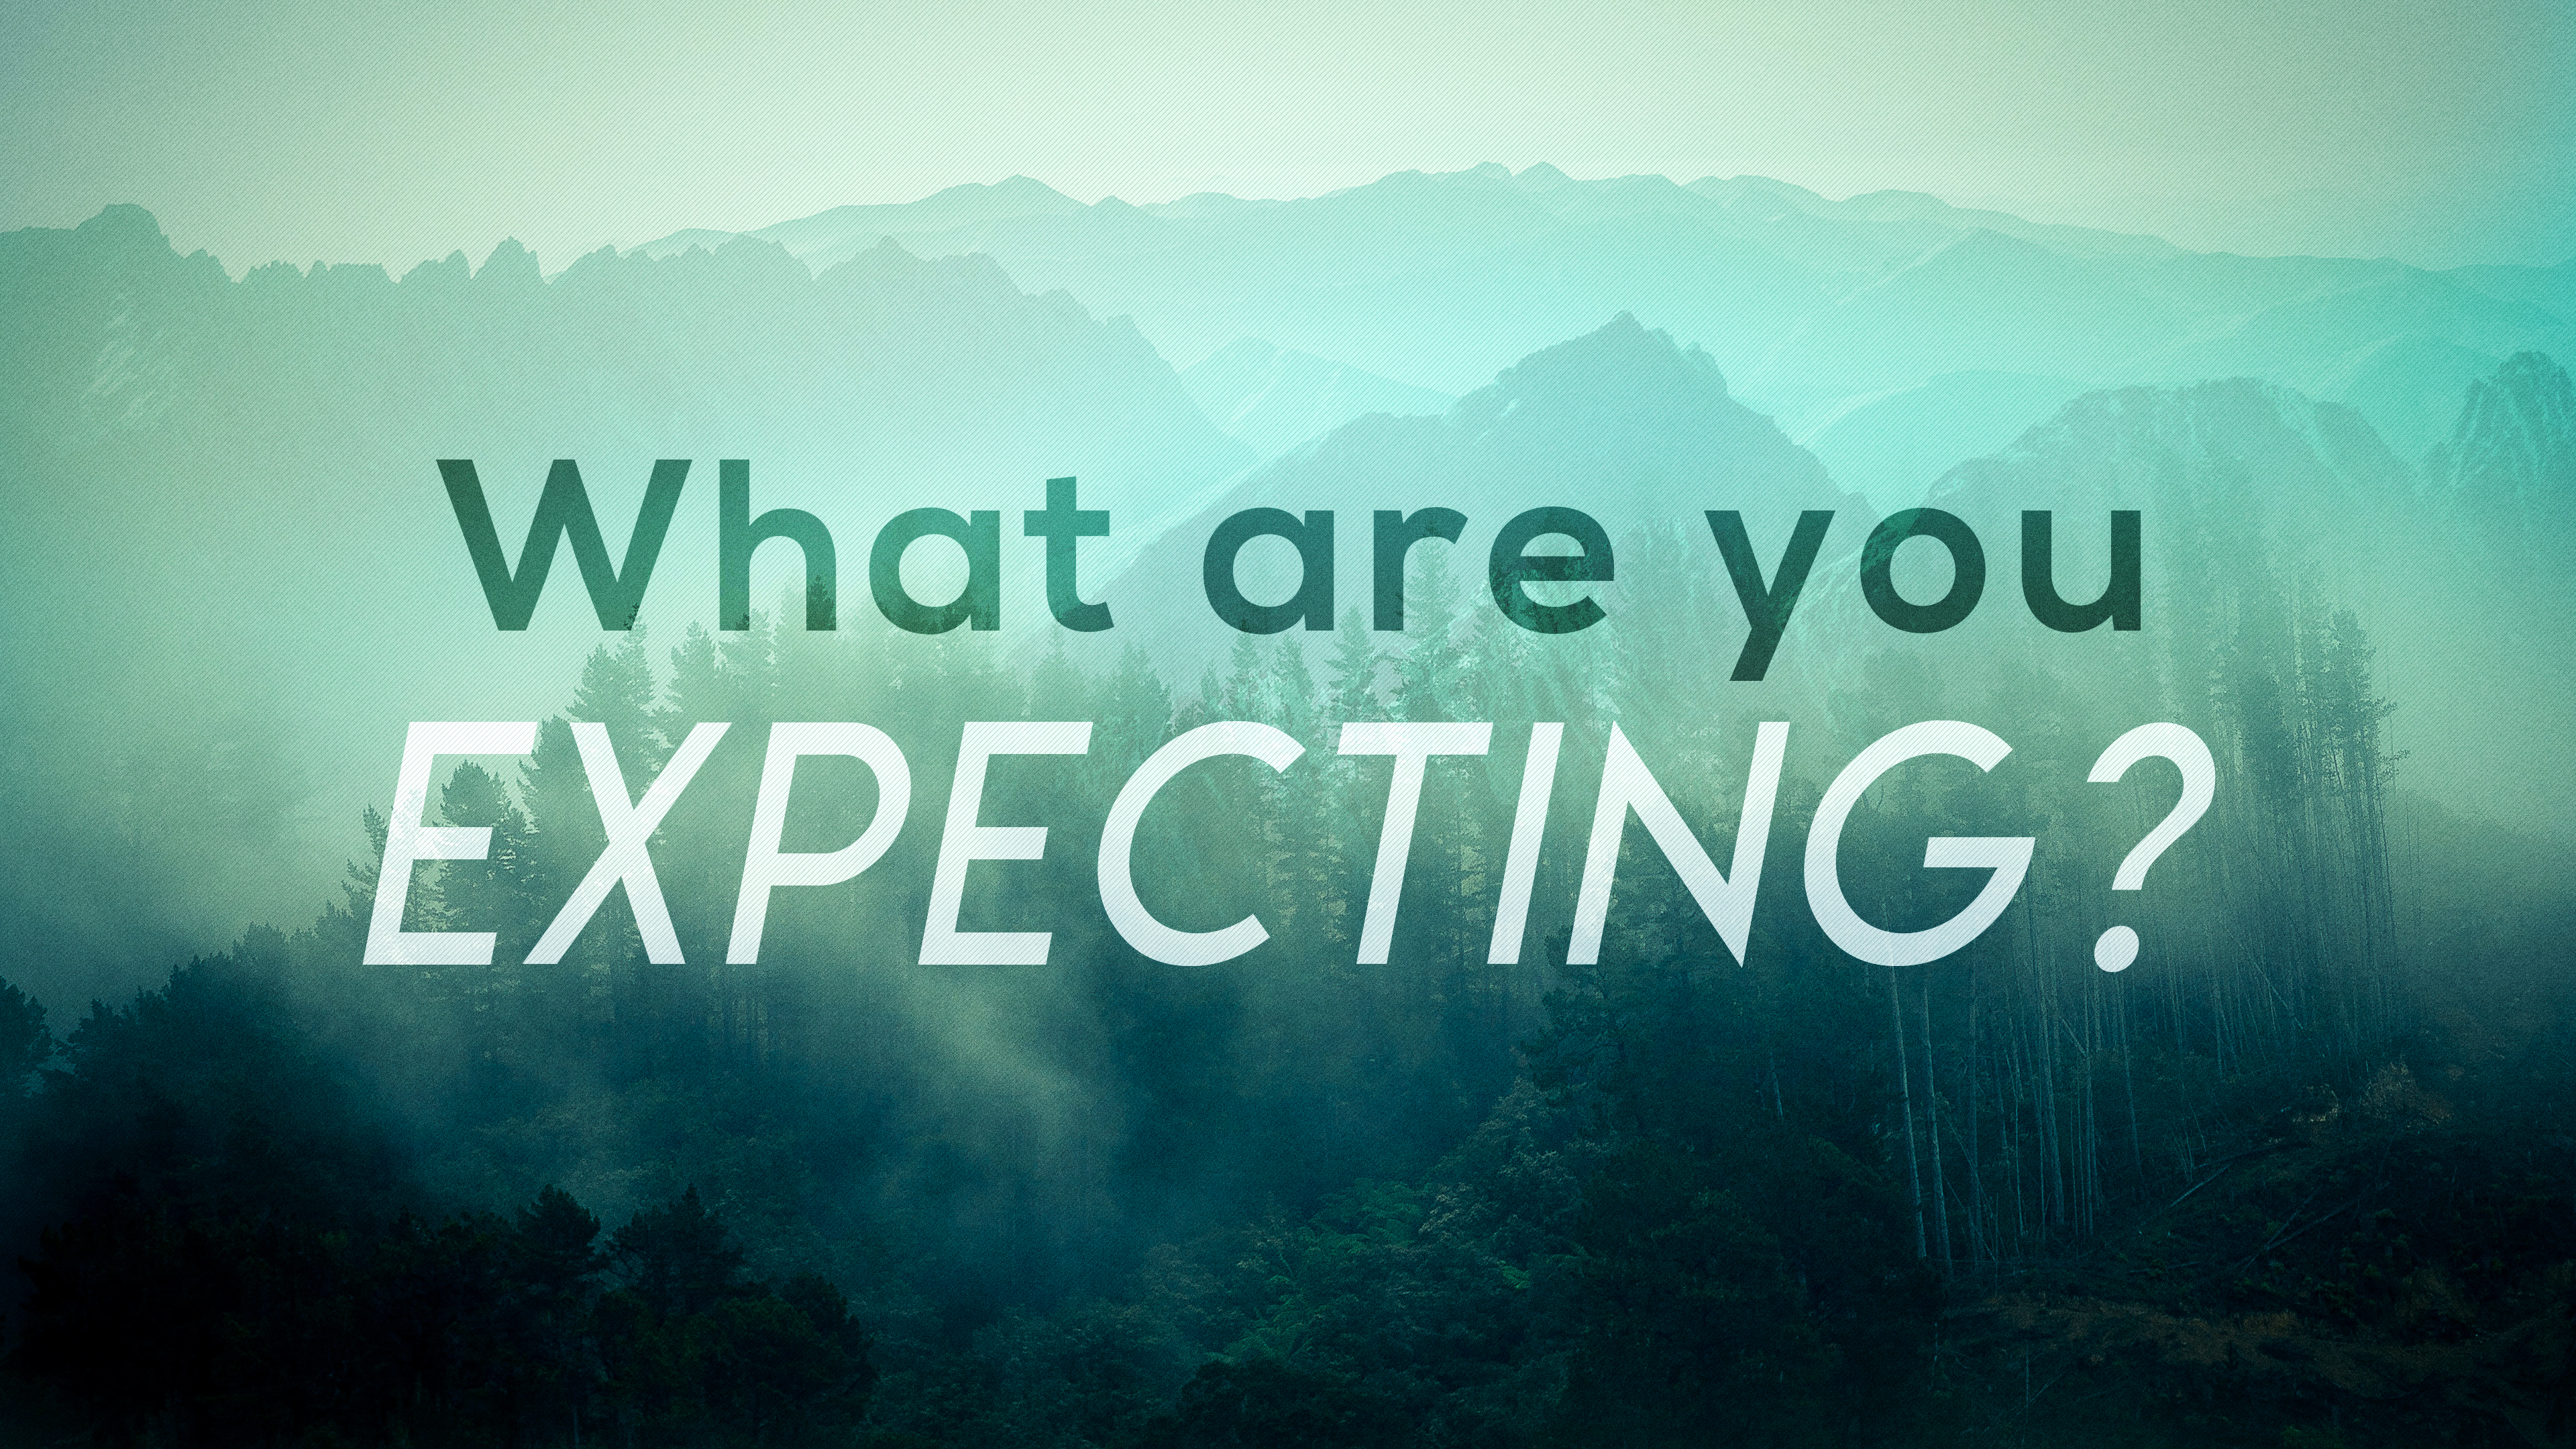 What are you expecting?